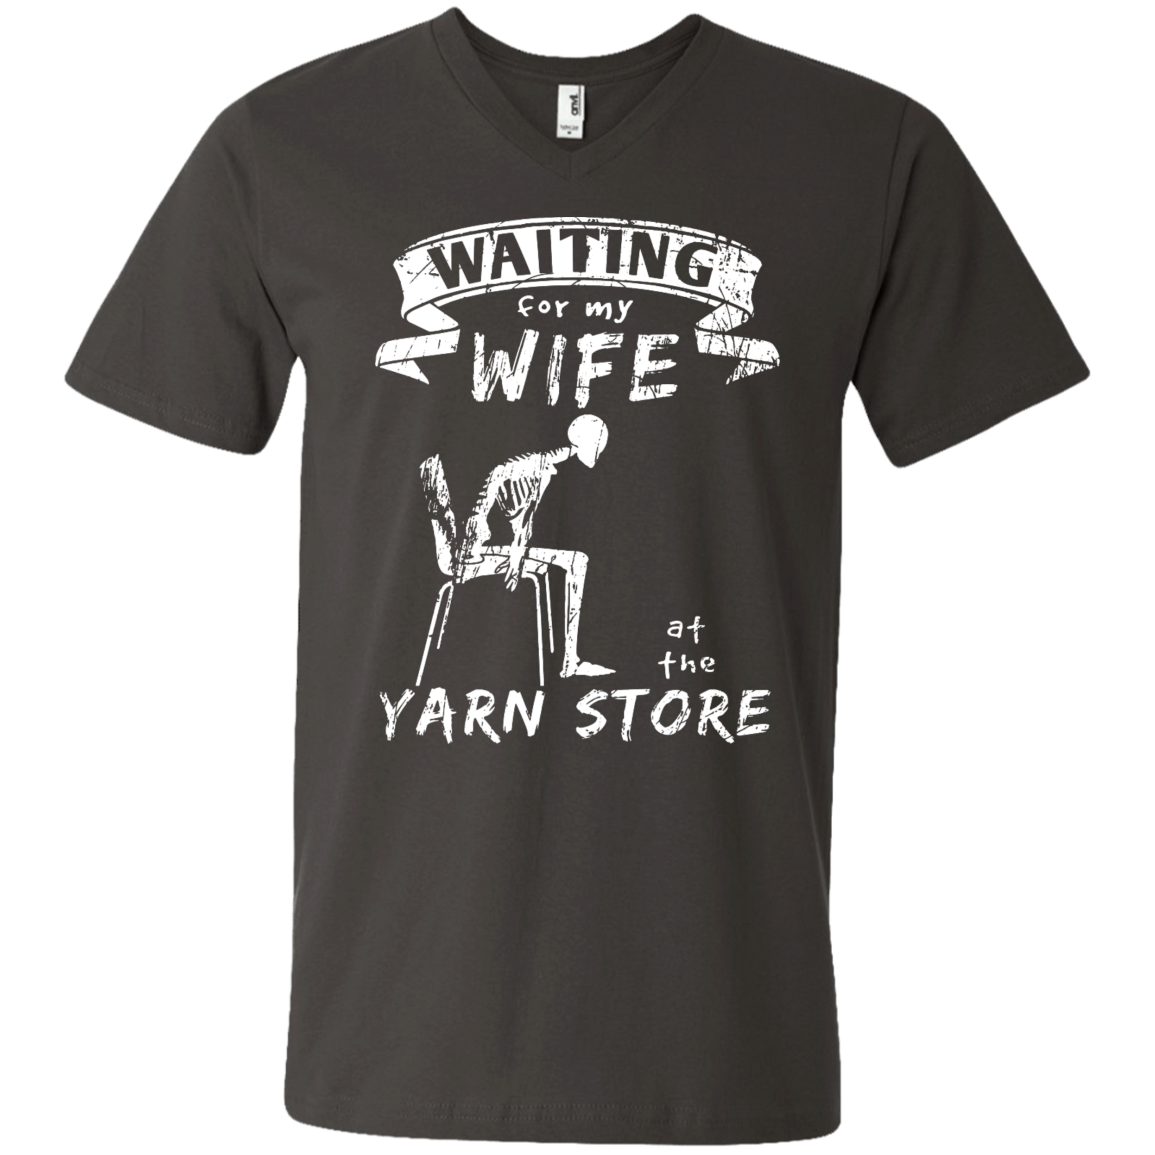 Waiting at the Yarn Store Men's and Unisex T-Shirts - Crafter4Life - 7